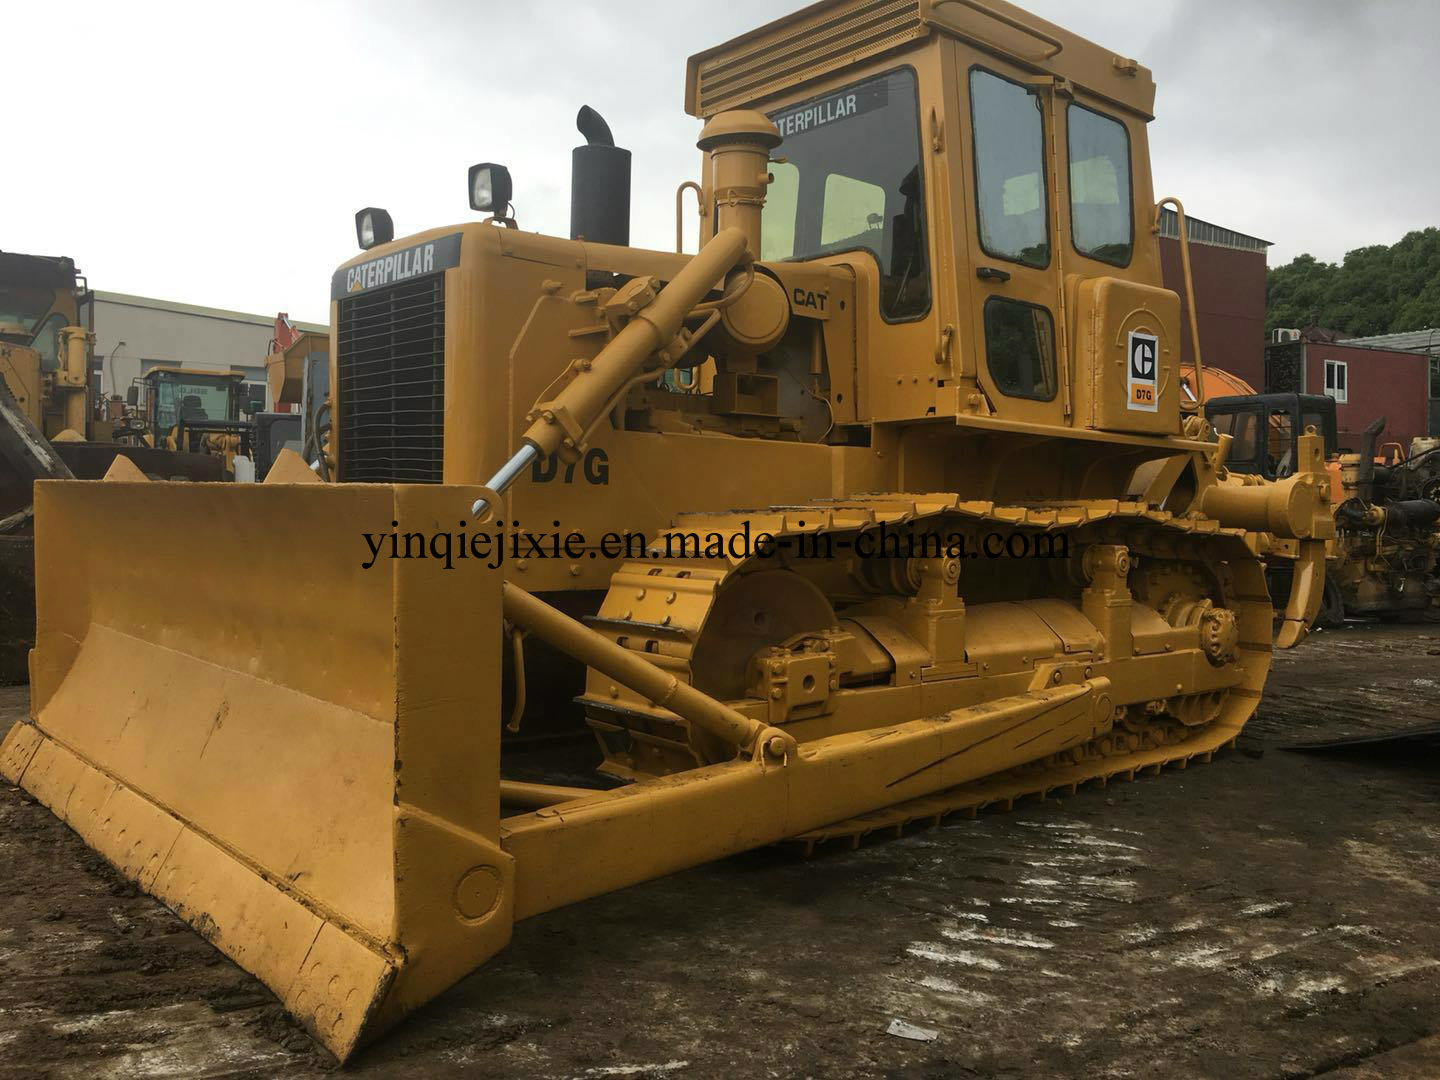 Used Cat D7g Bulldozer, Secondhand Caterpillar D7g Bulldozer in Good Condition